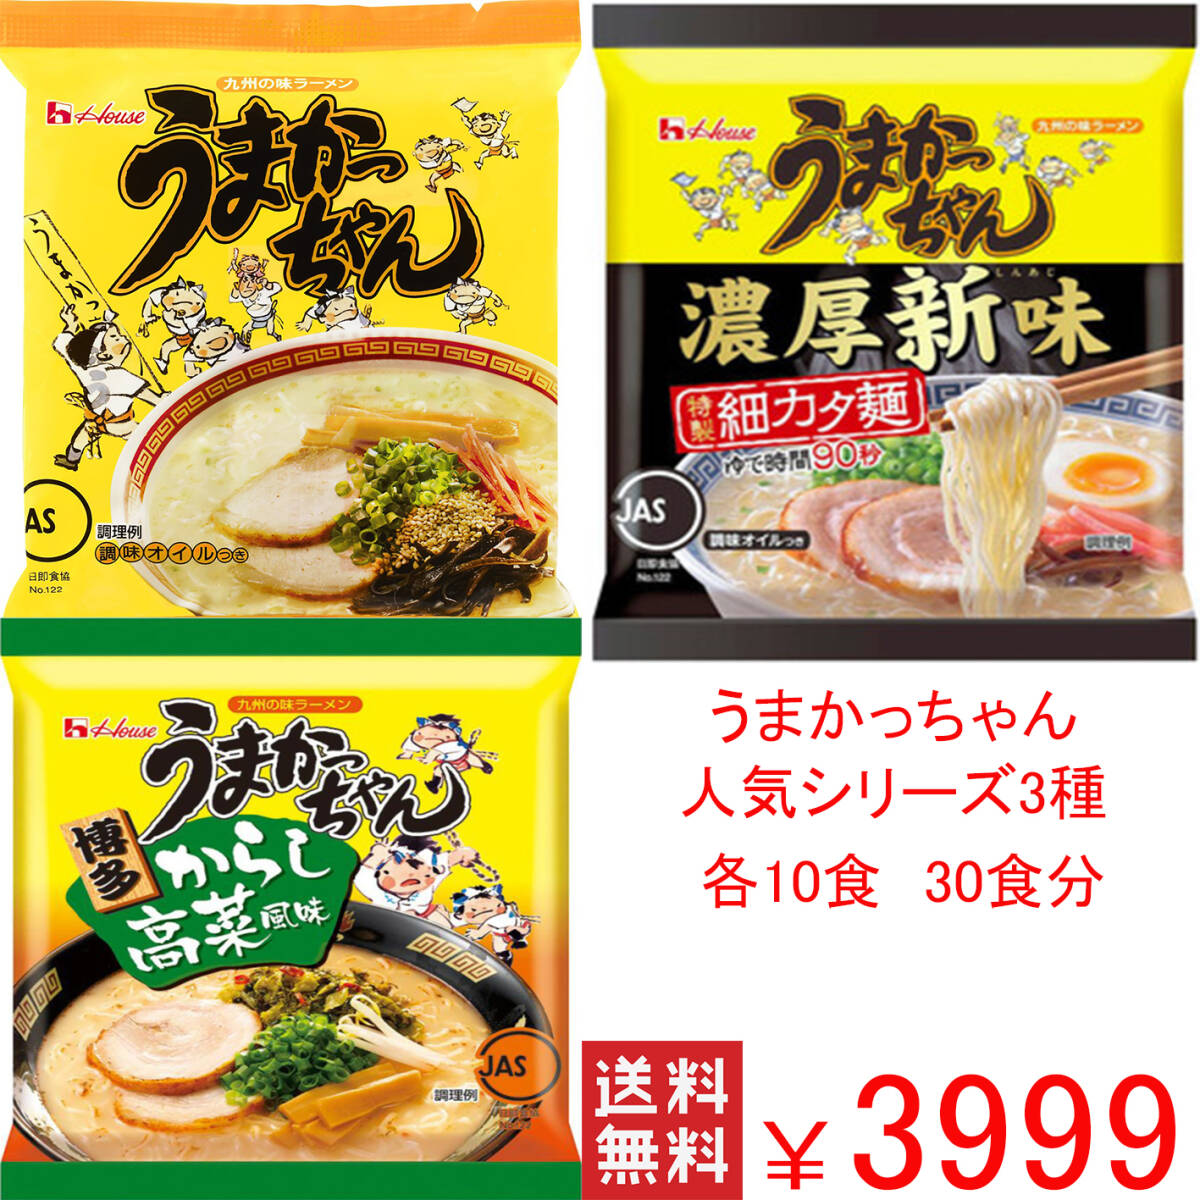  great special price super-discount limited amount .... Chan popular series 3 kind each 10 meal minute 30 meal minute nationwide free shipping 315